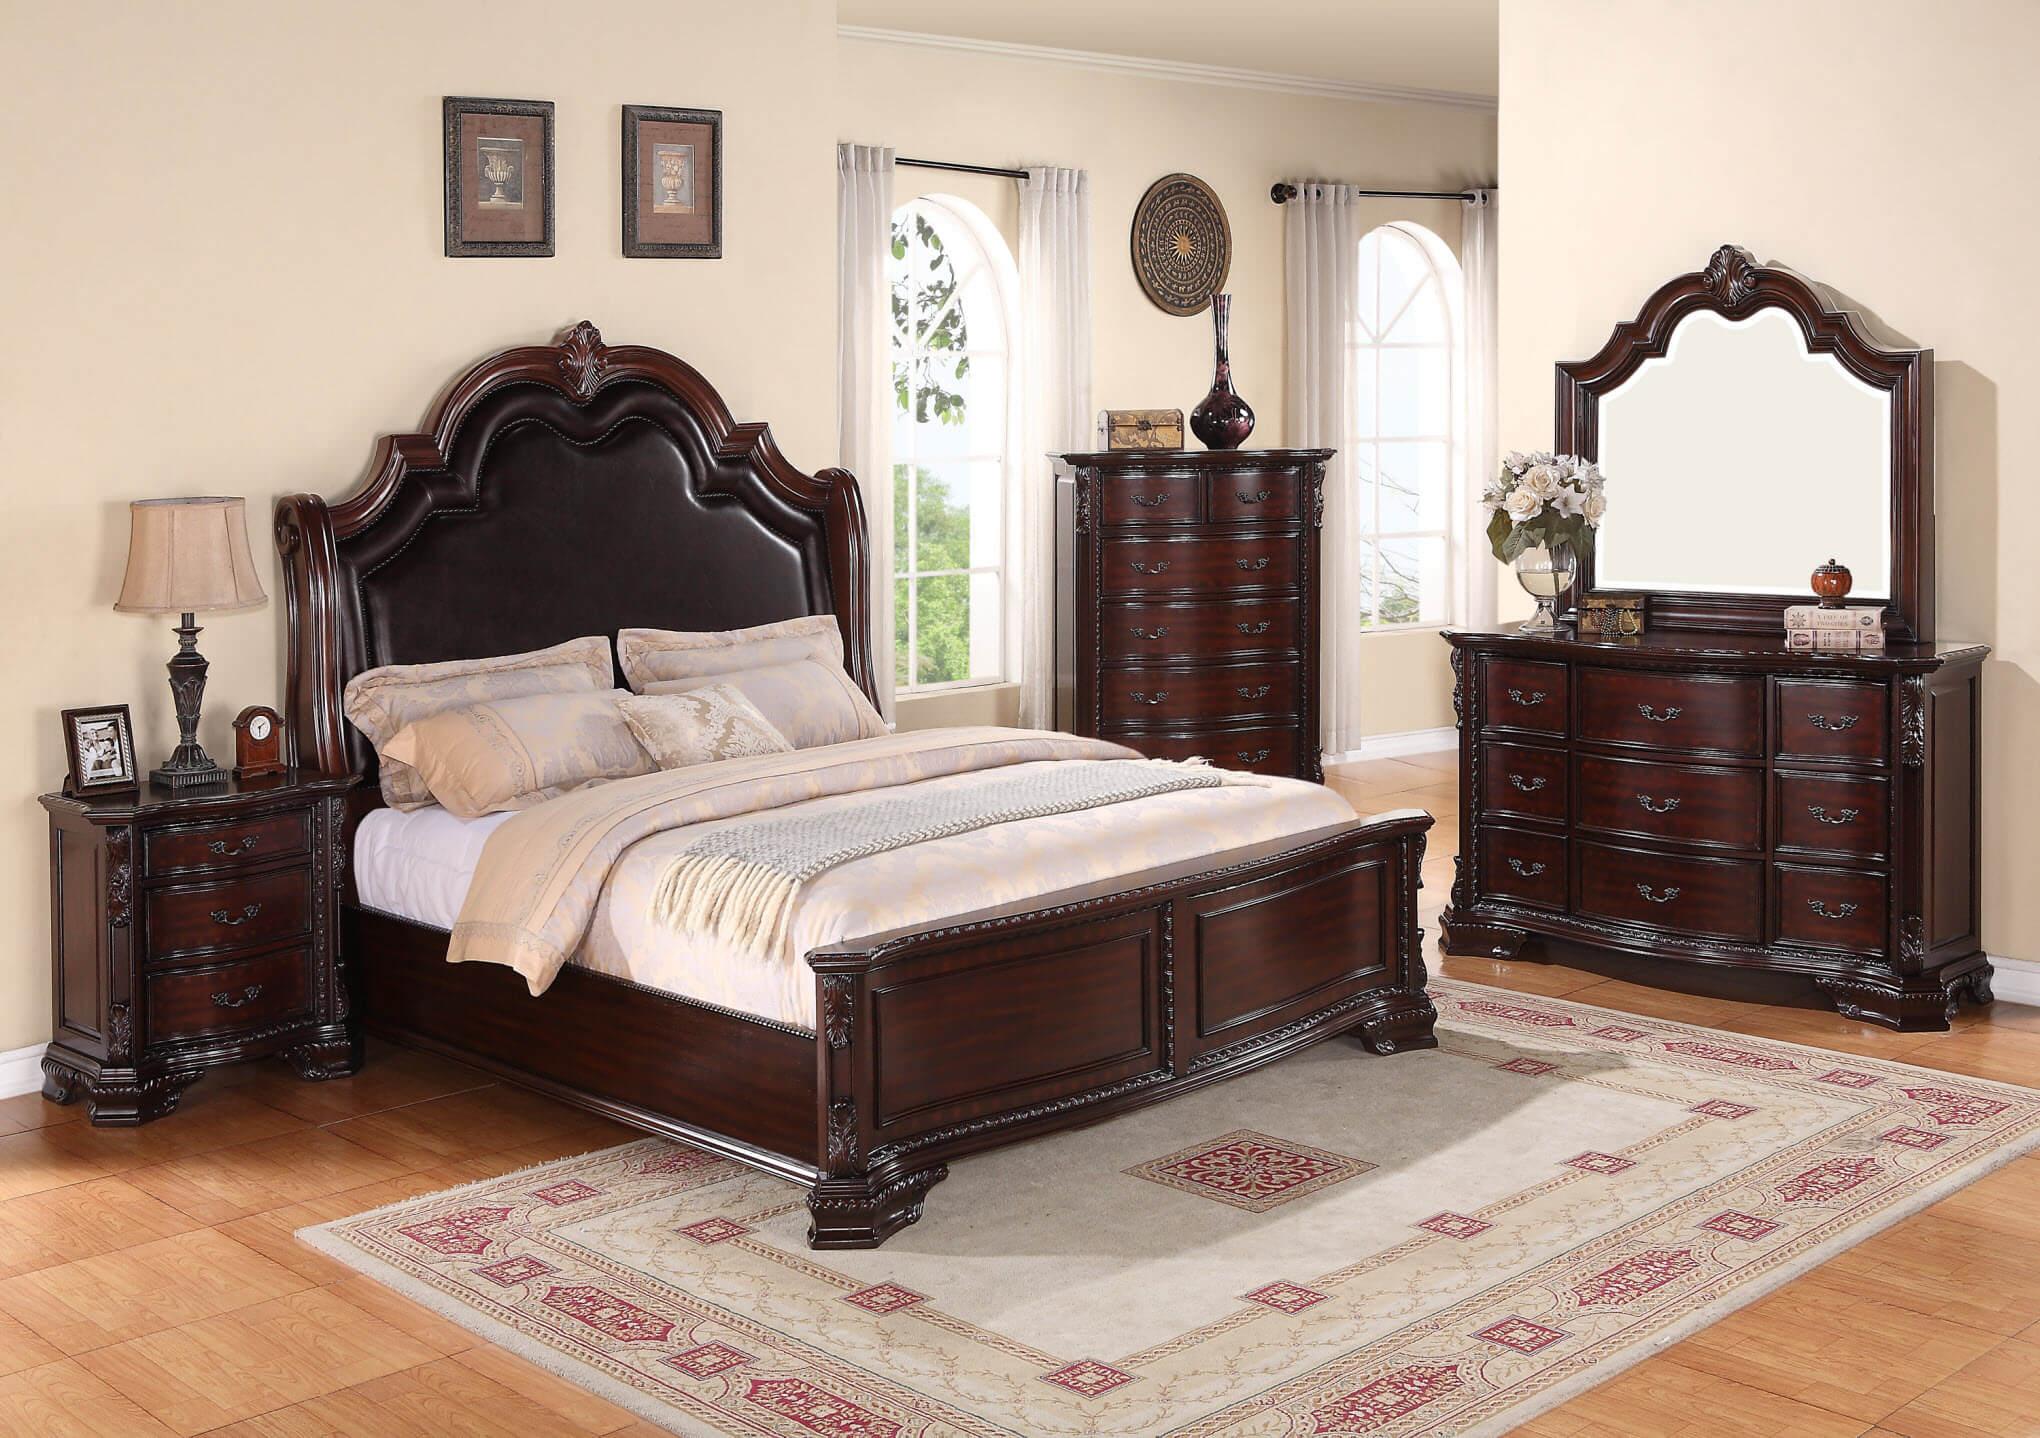 

    
Brown Panel Bedroom Set by Crown Mark Sheffield B1100-Q-Bed-5pcs
